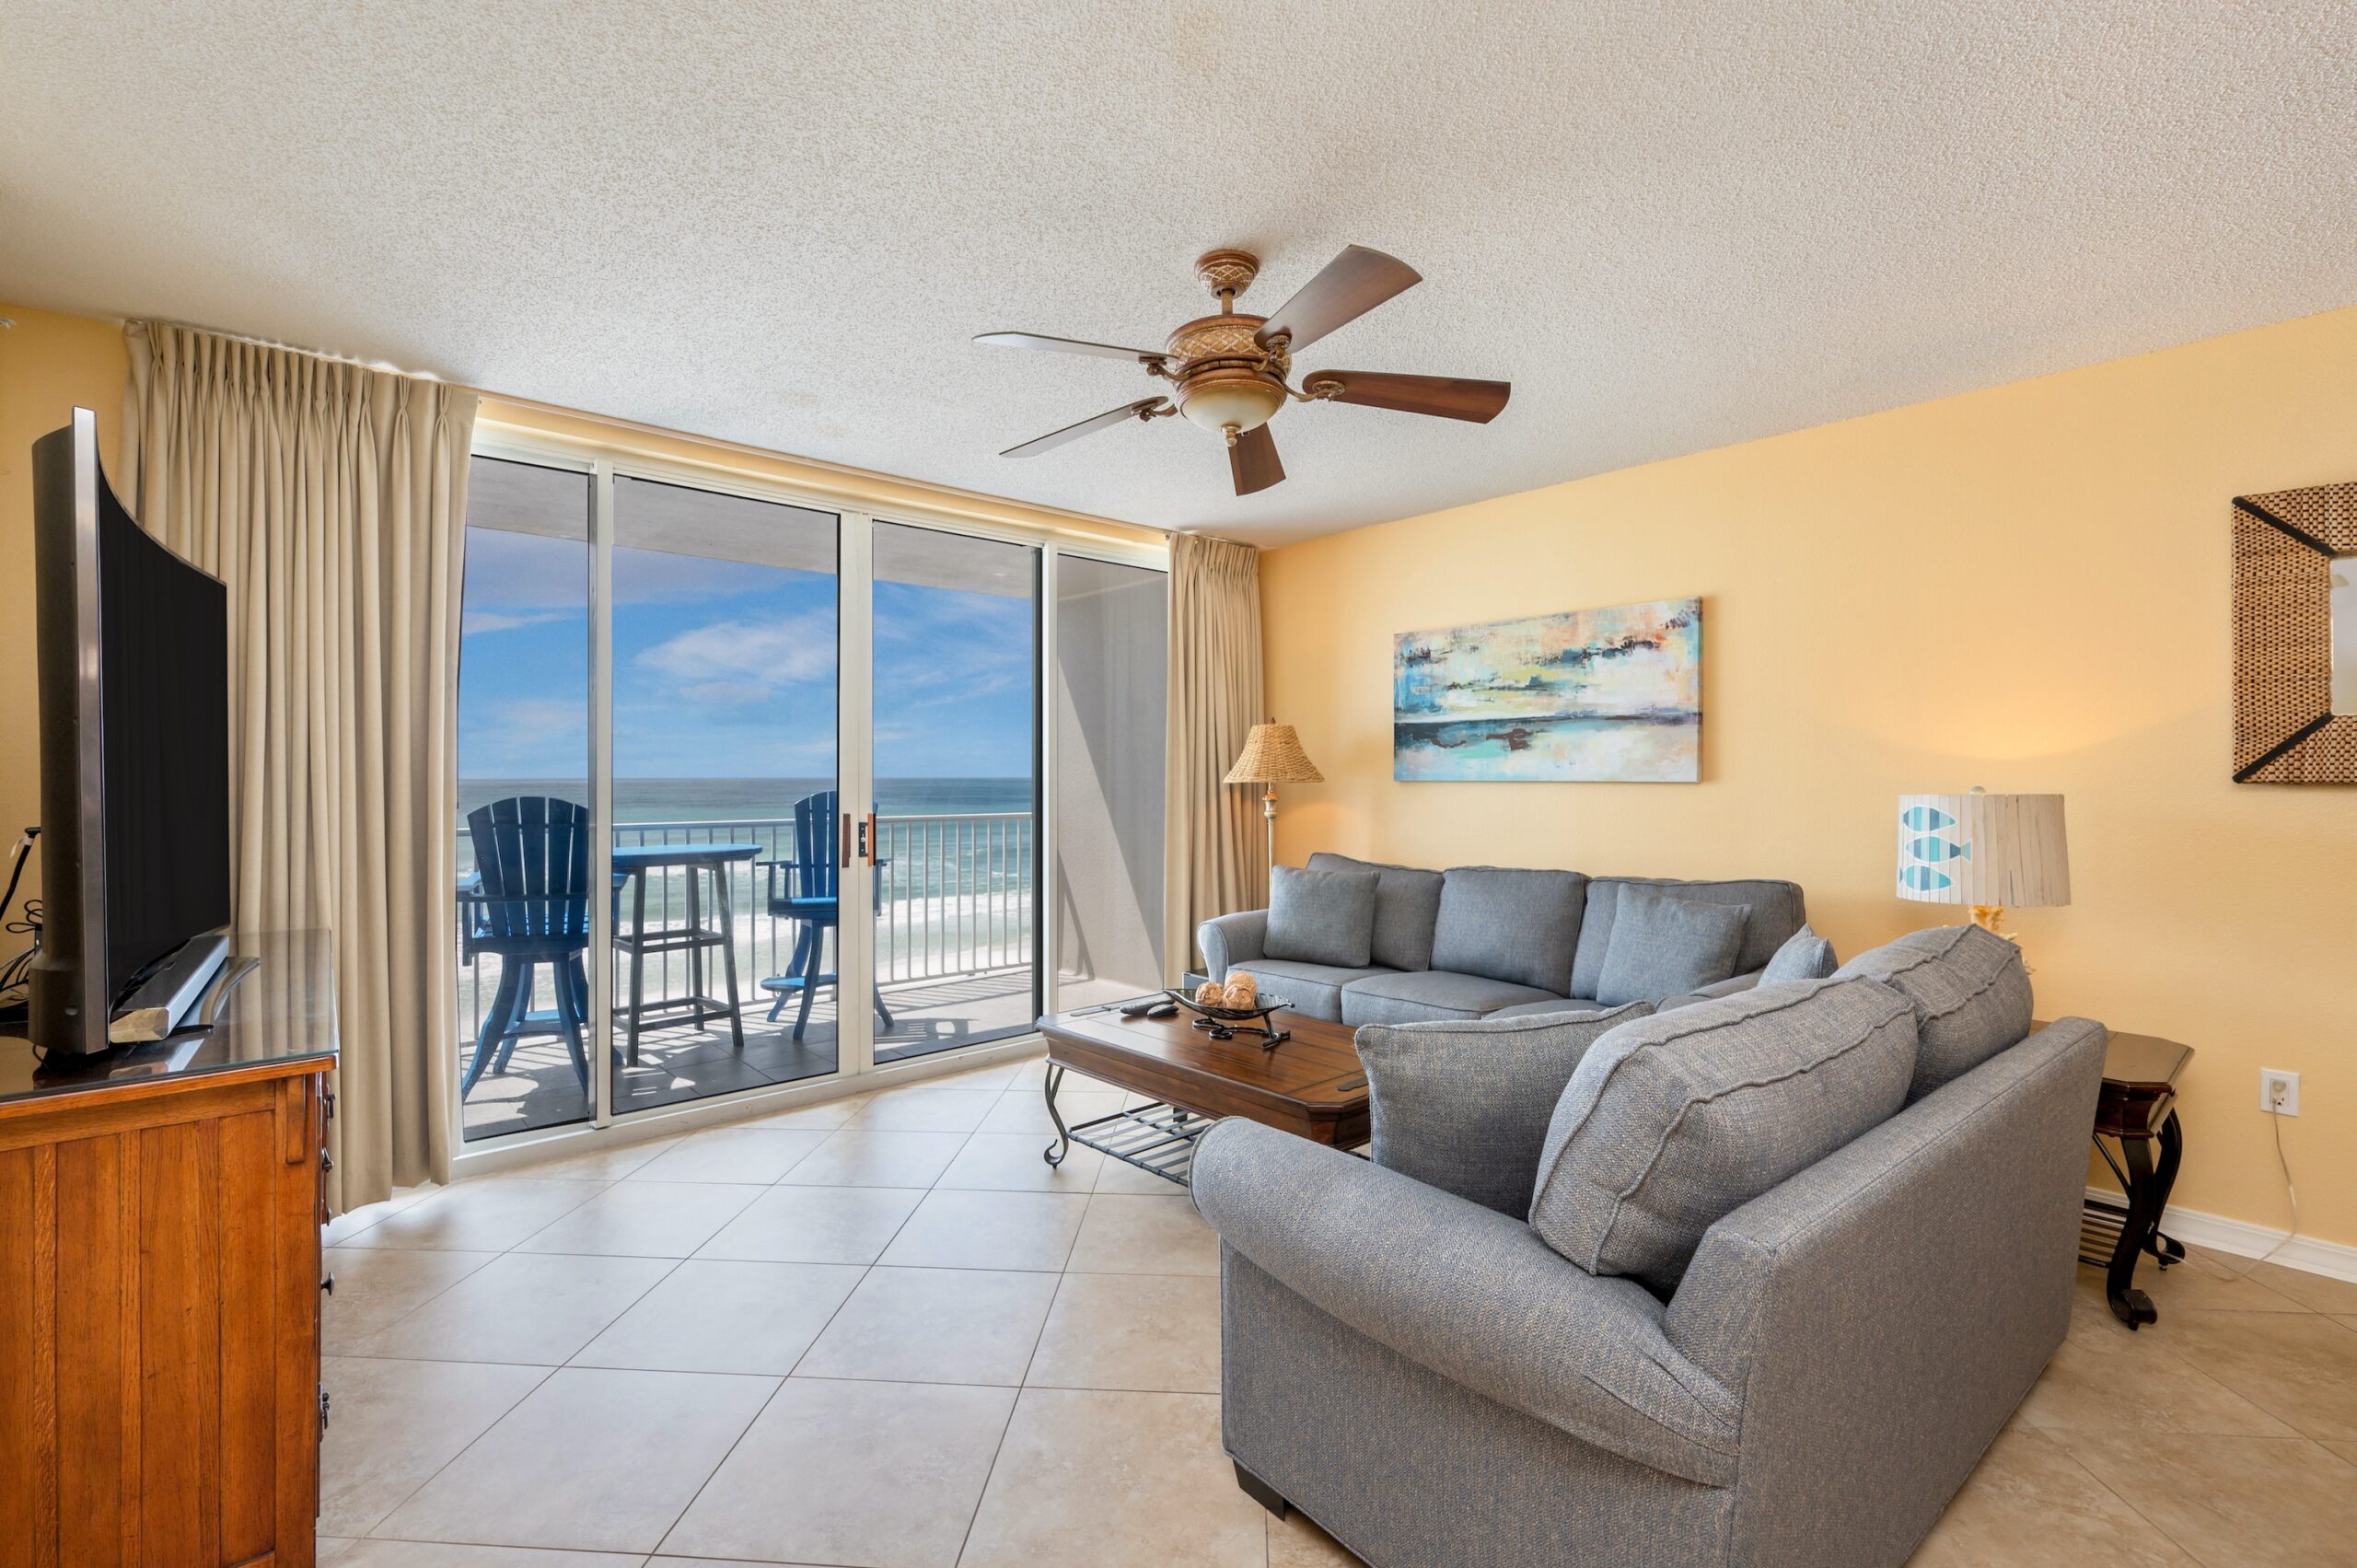 Living room with ocean view in Island Princess condo